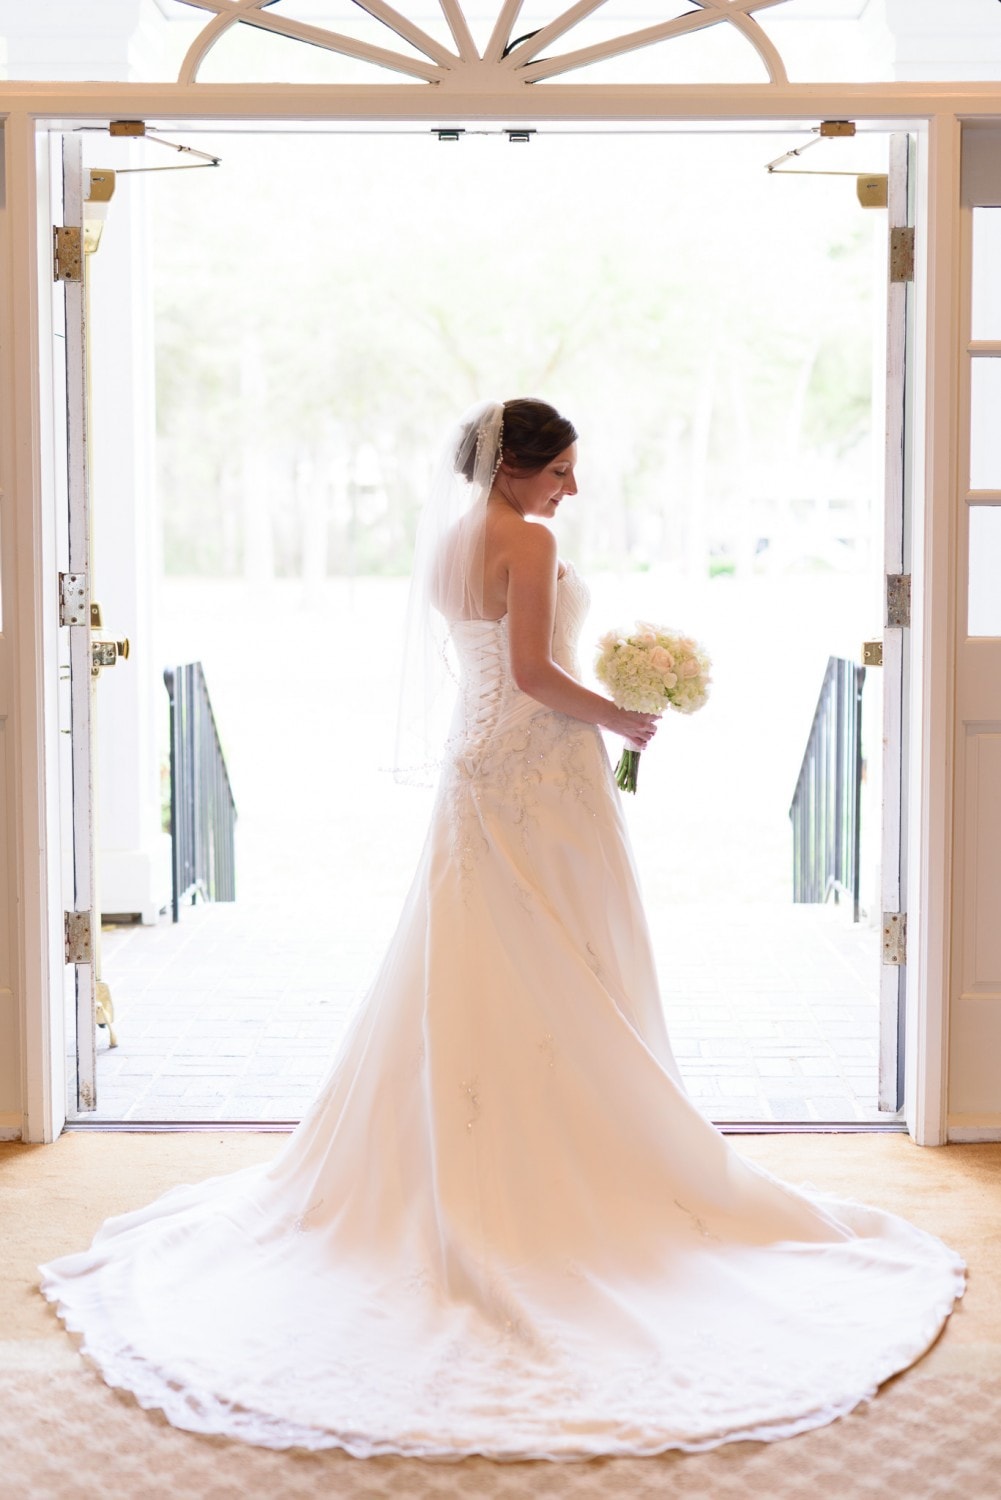 Bride posing in the sunlight from the doorway - Pawleys Plantation